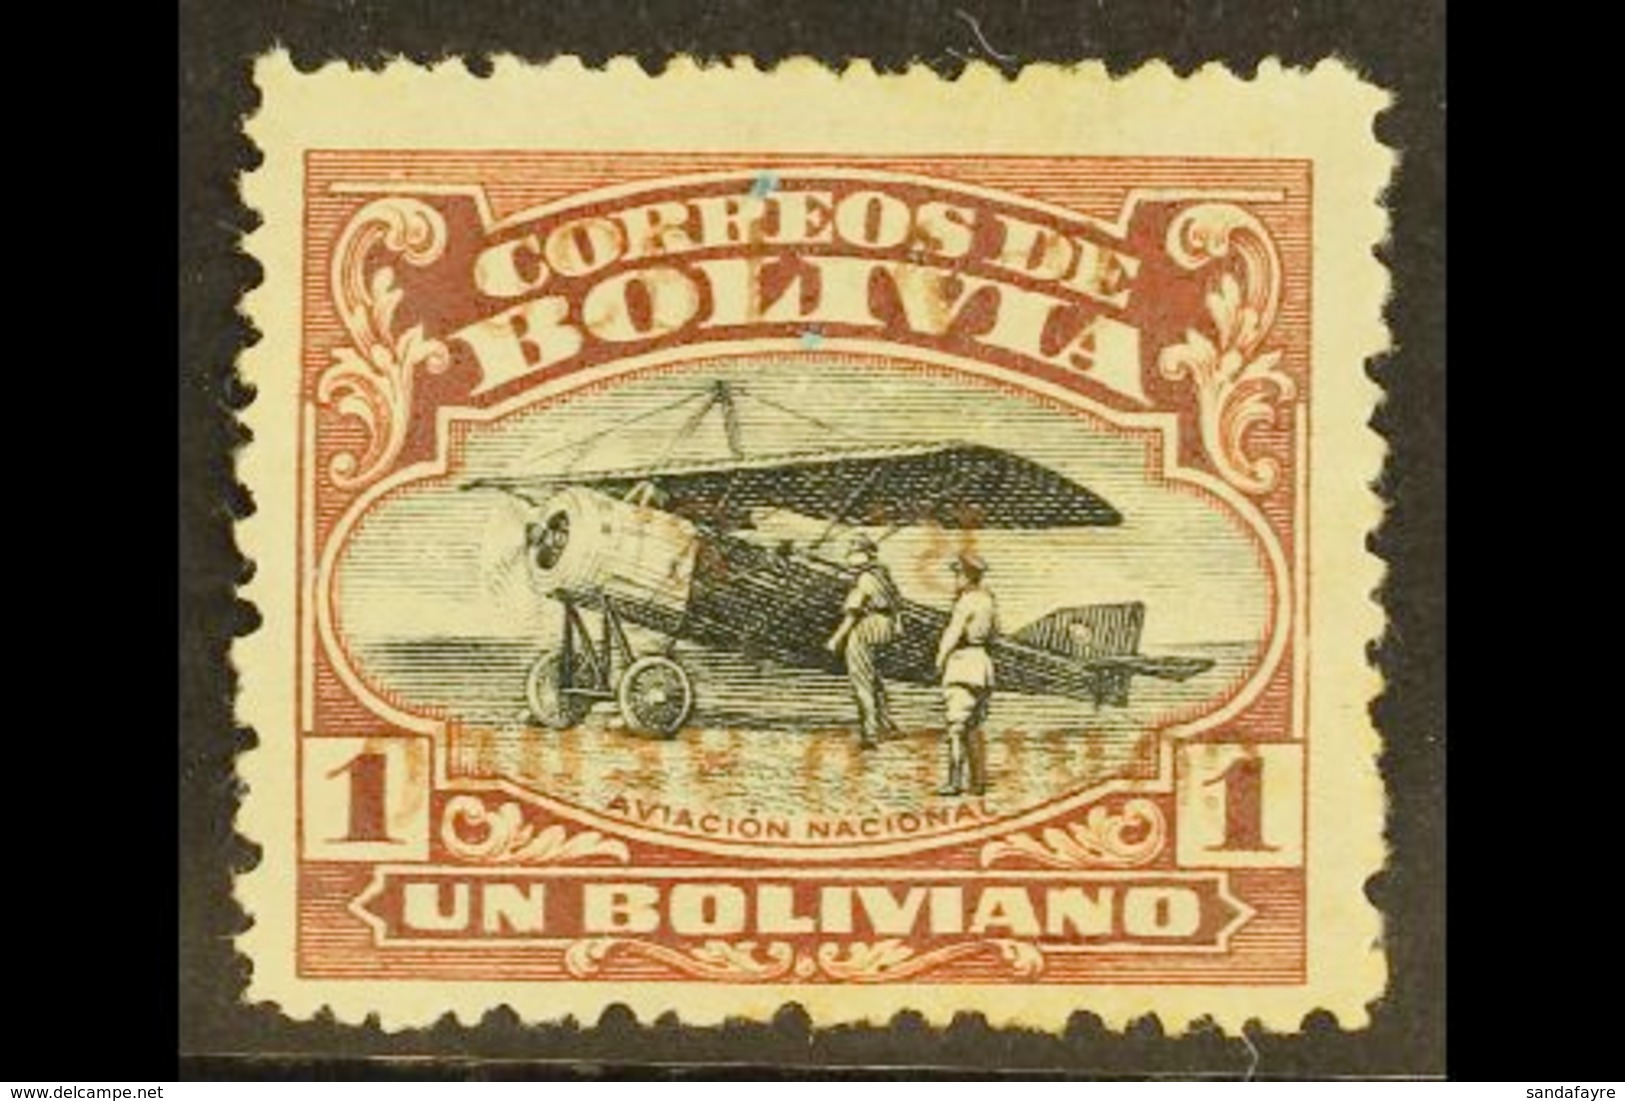 1930 1b Red-brown & Black Air Zeppelin "Correo Aereo" INVERTED OVERPRINT Variety, Scott C18a, Fine Mint, Rather Weak Ove - Bolivie